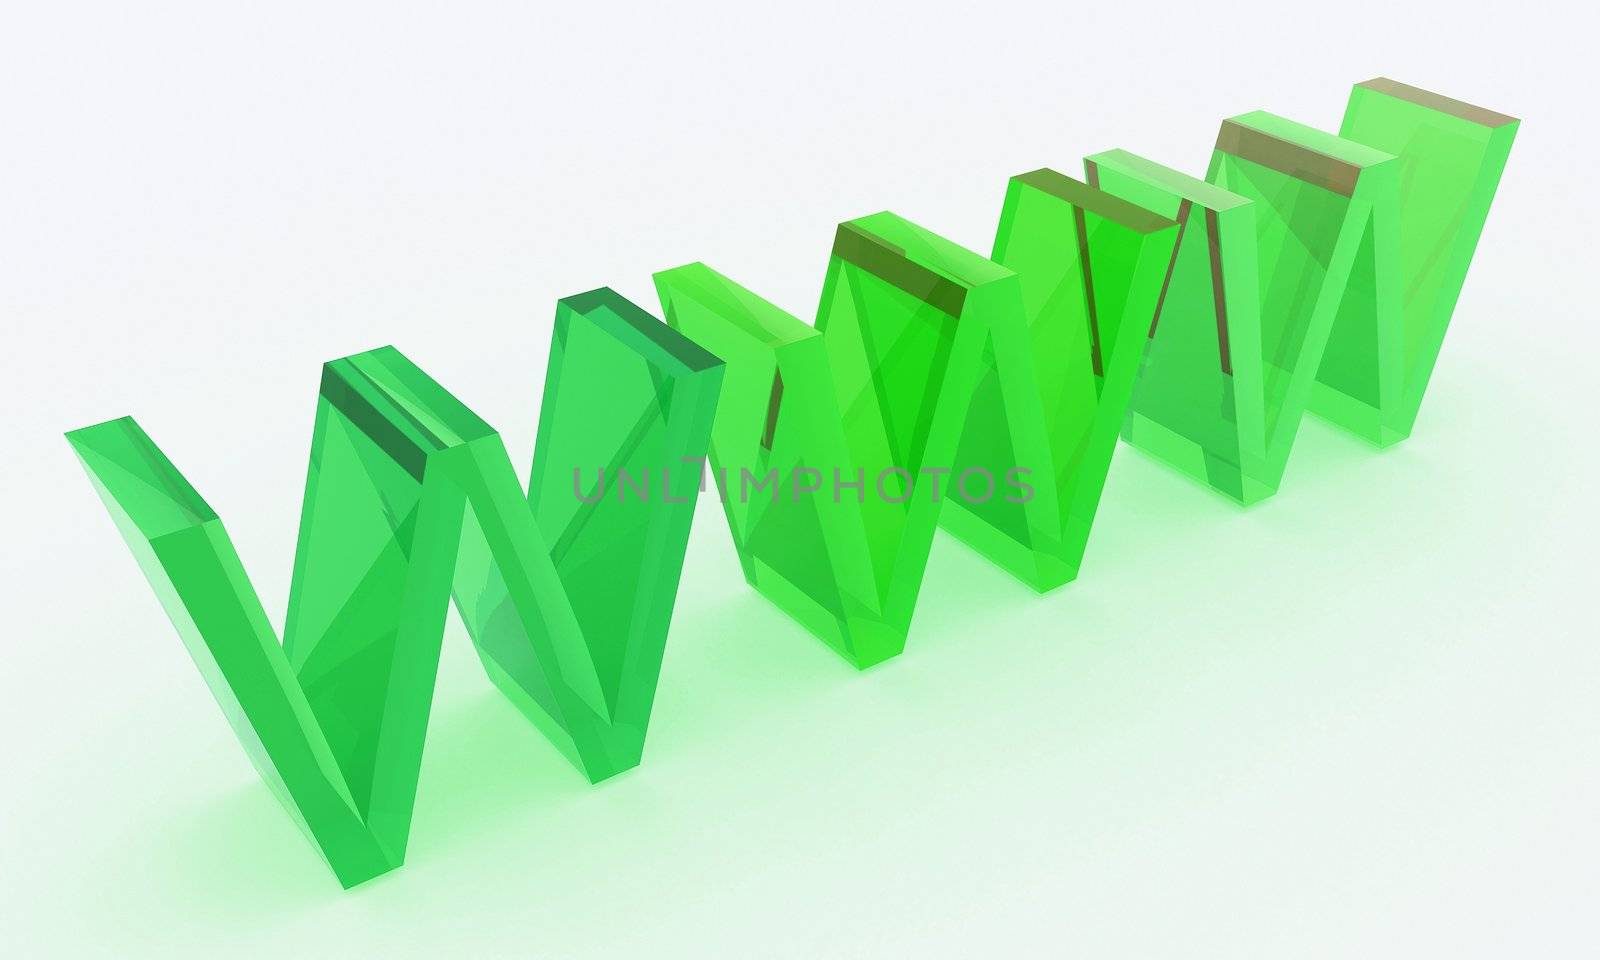 Rendered 3D WWW text made of glass in green color scheme
